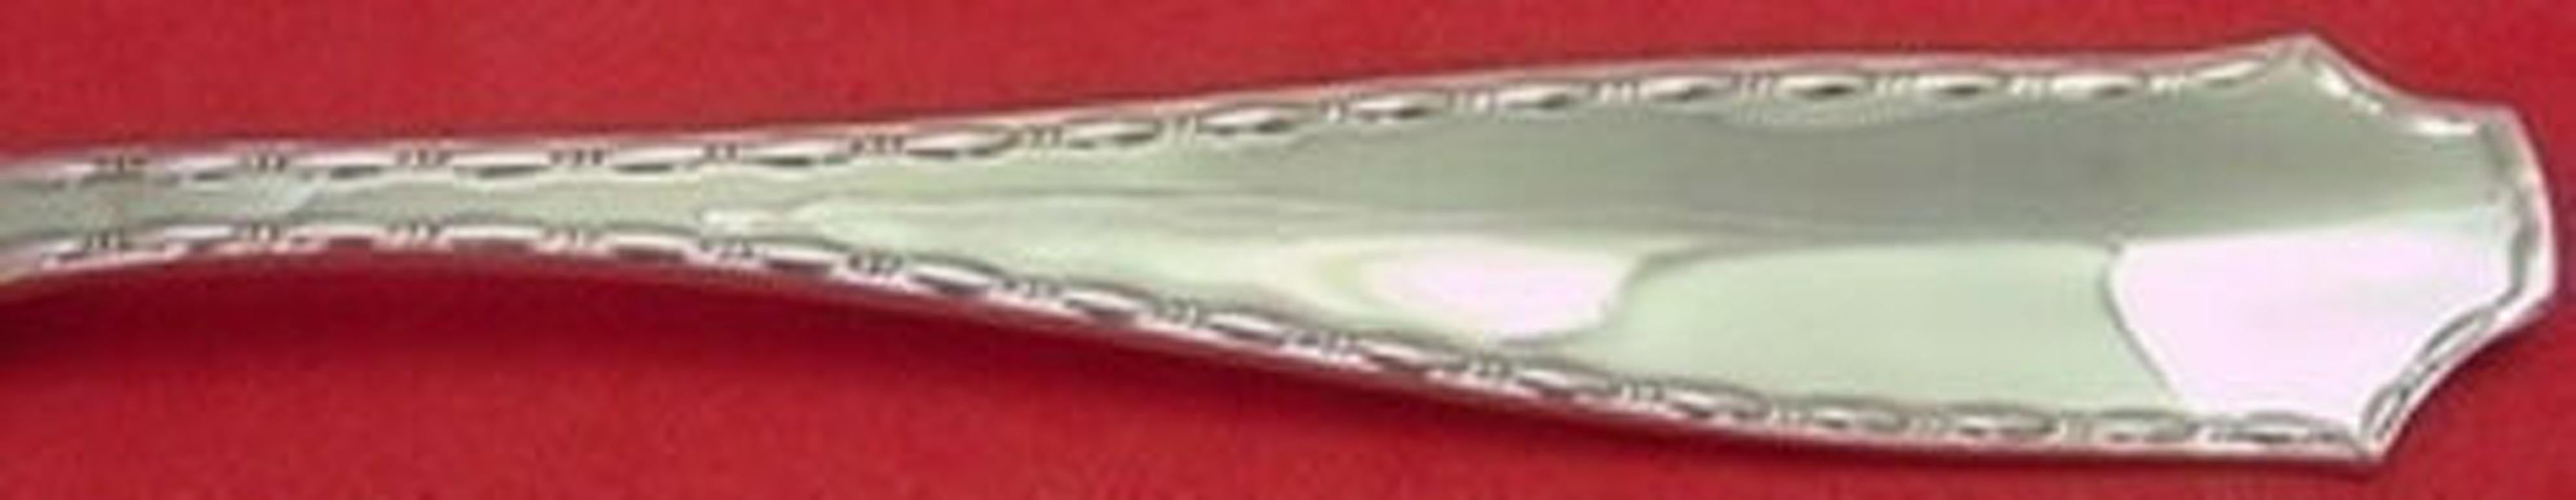 Sterling silver berry spoon 9 1/4